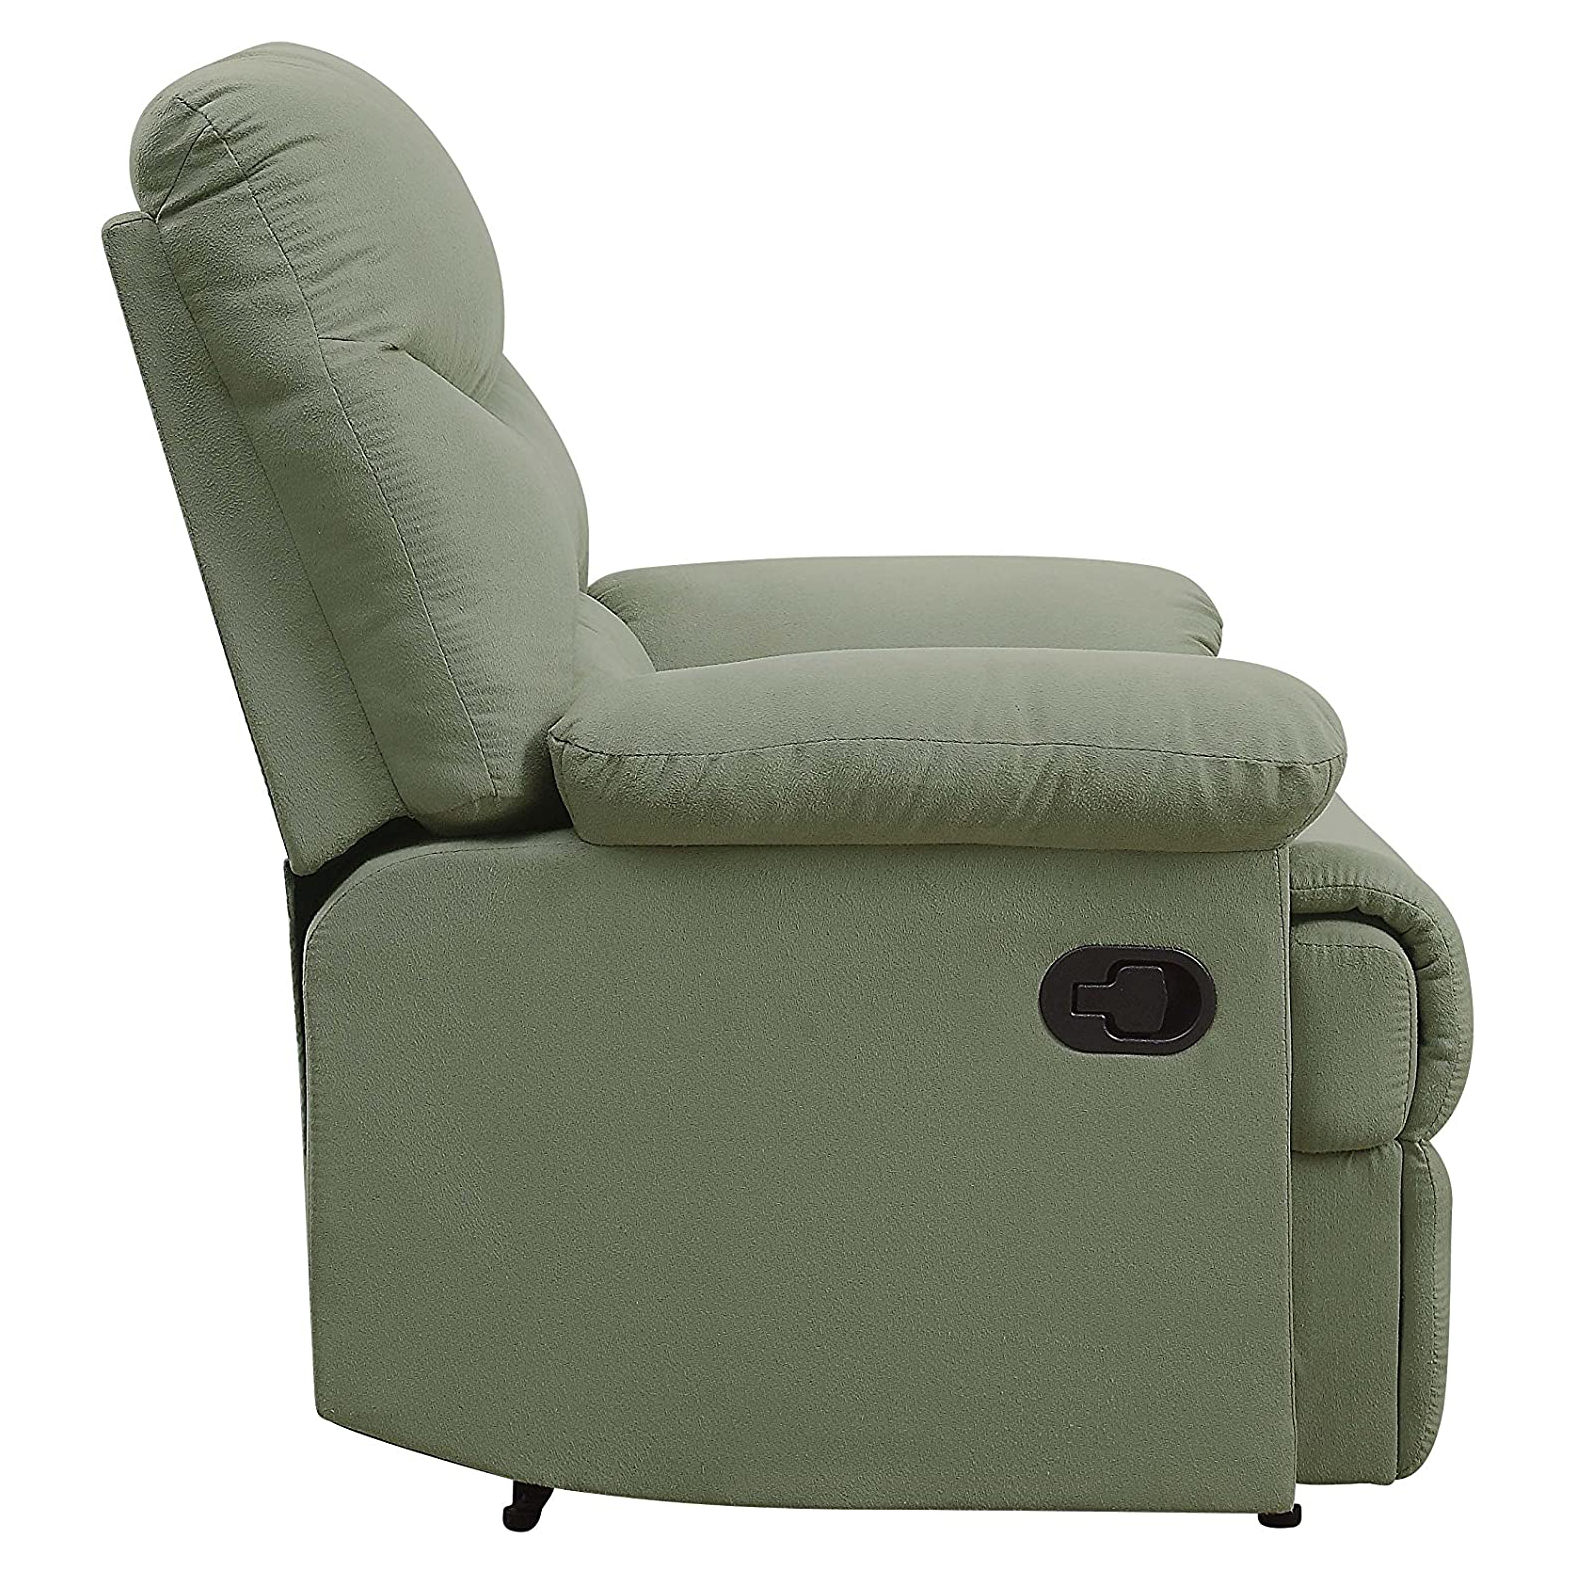 ACME Arcadia Smooth Microfiber Recliner Chair with External Handle, Sage Green - image 3 of 6